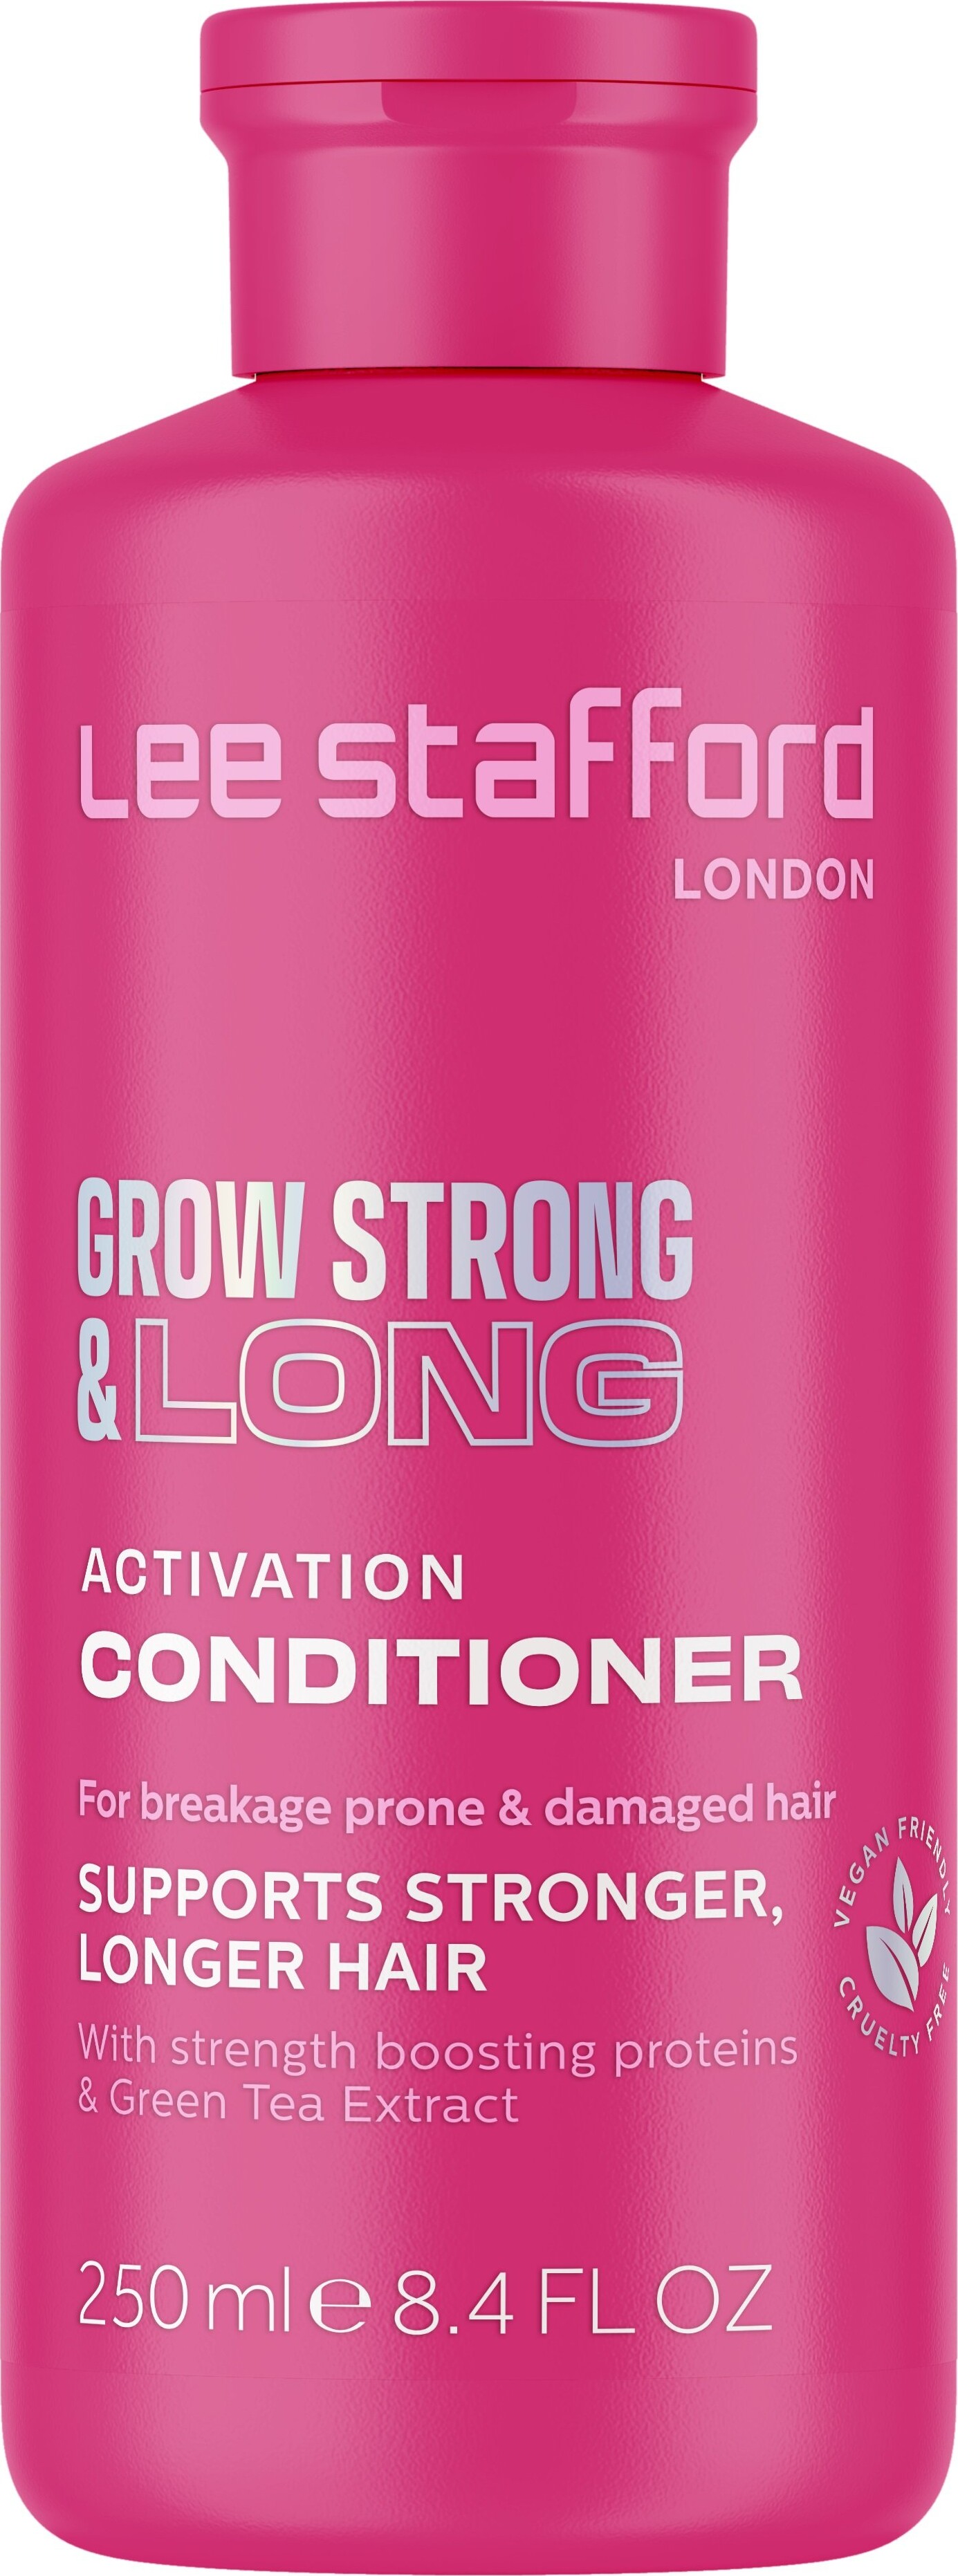 Lee Stafford - Grow Strong & Long Activation Conditioner - 250 Ml